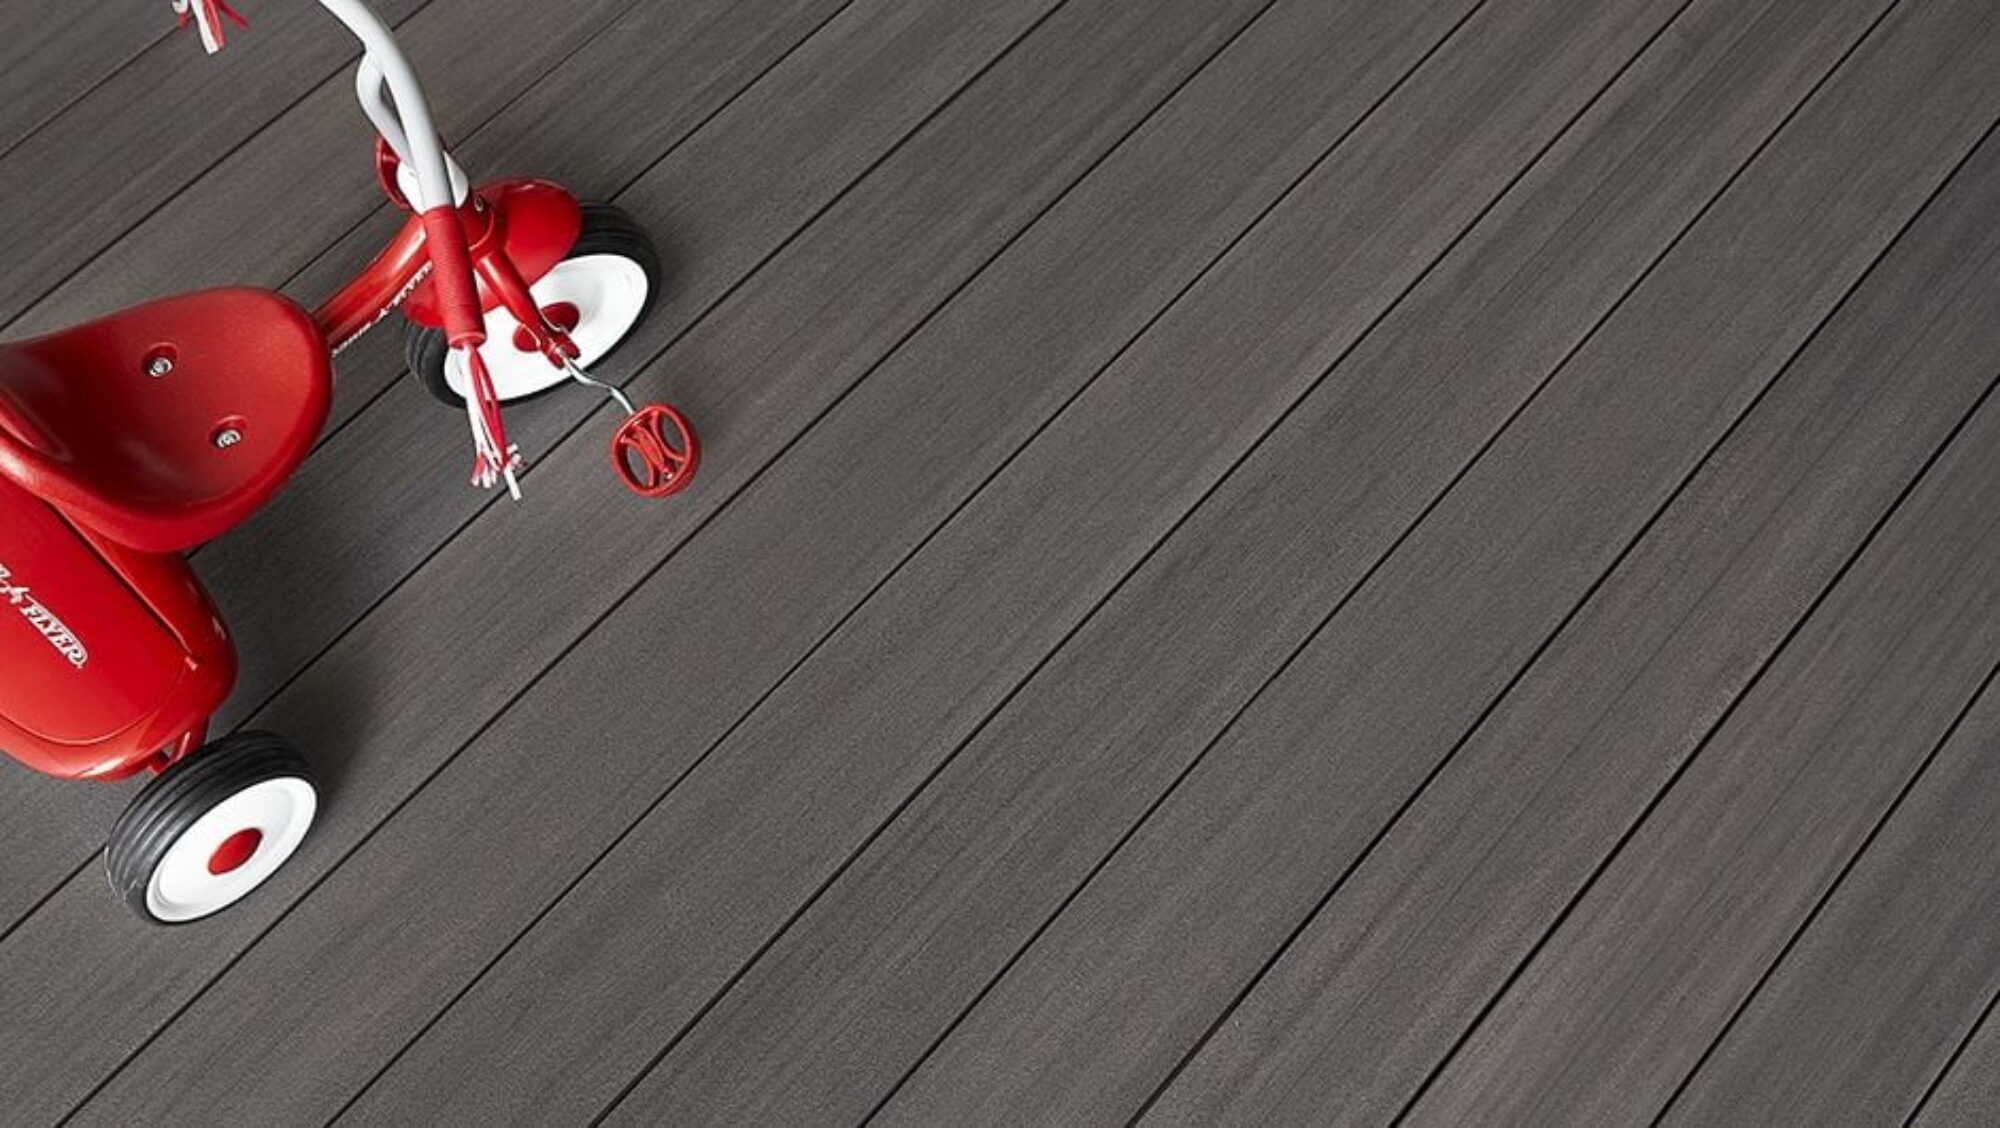 Premium Composites vs Low-end Composites — Composite Decking Differences – How to Tell?